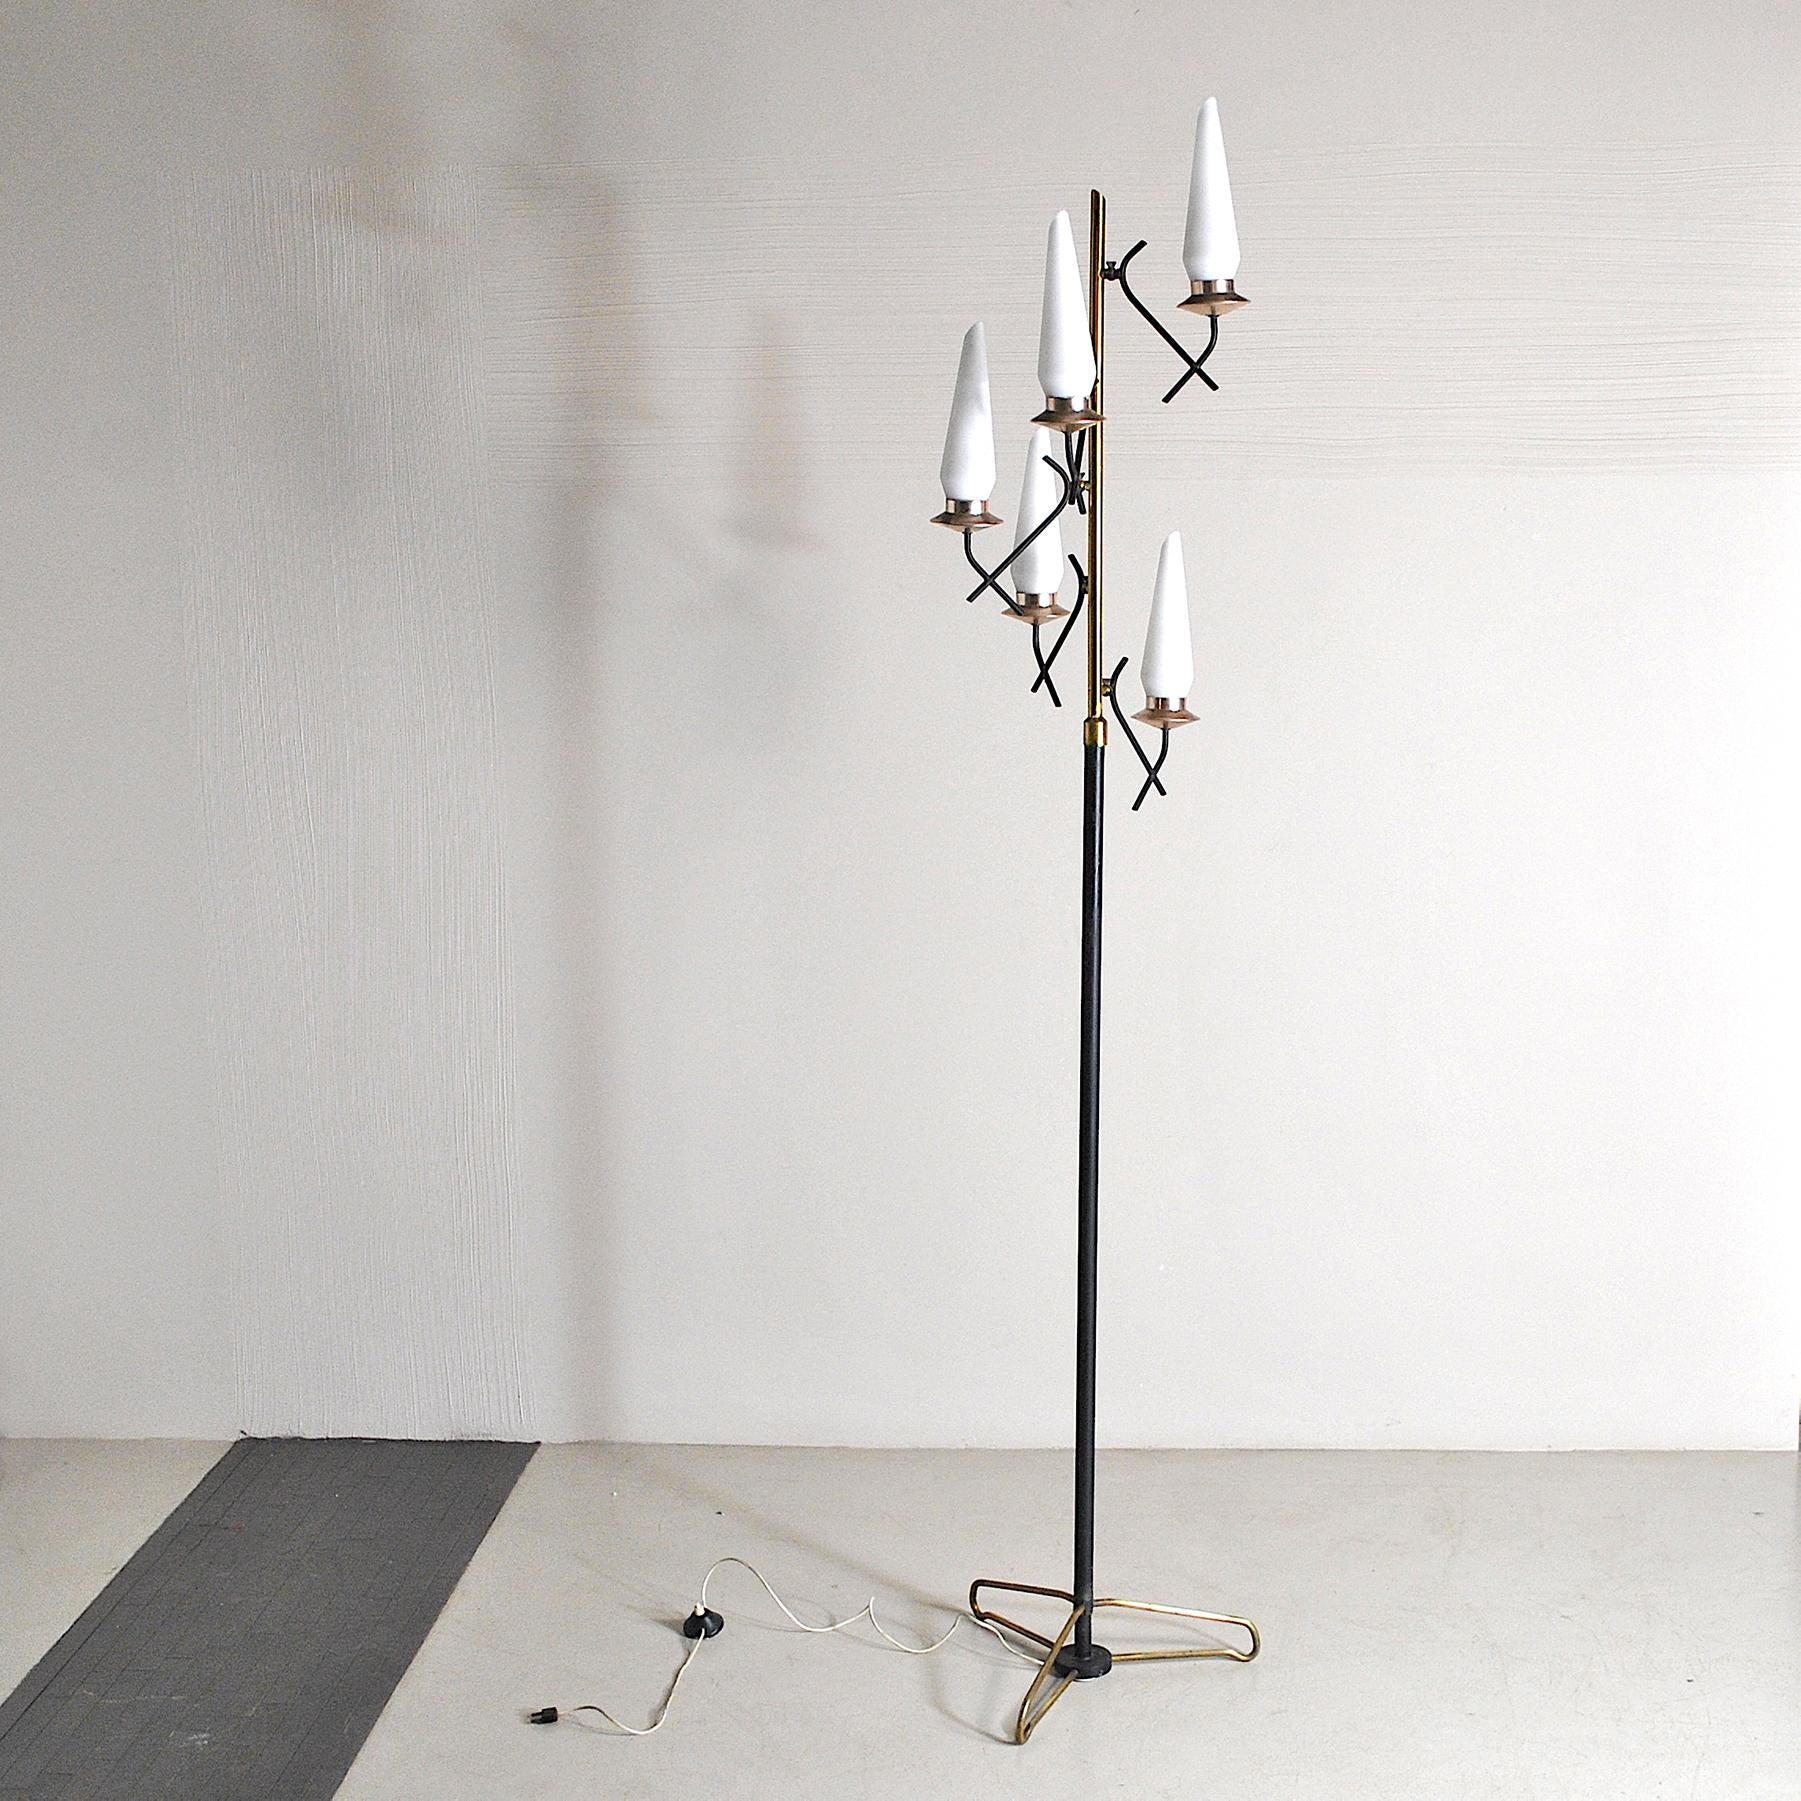 Floor lamp with six lighting bodies by Stilnovo in brass and opaline glass from the 1950s.